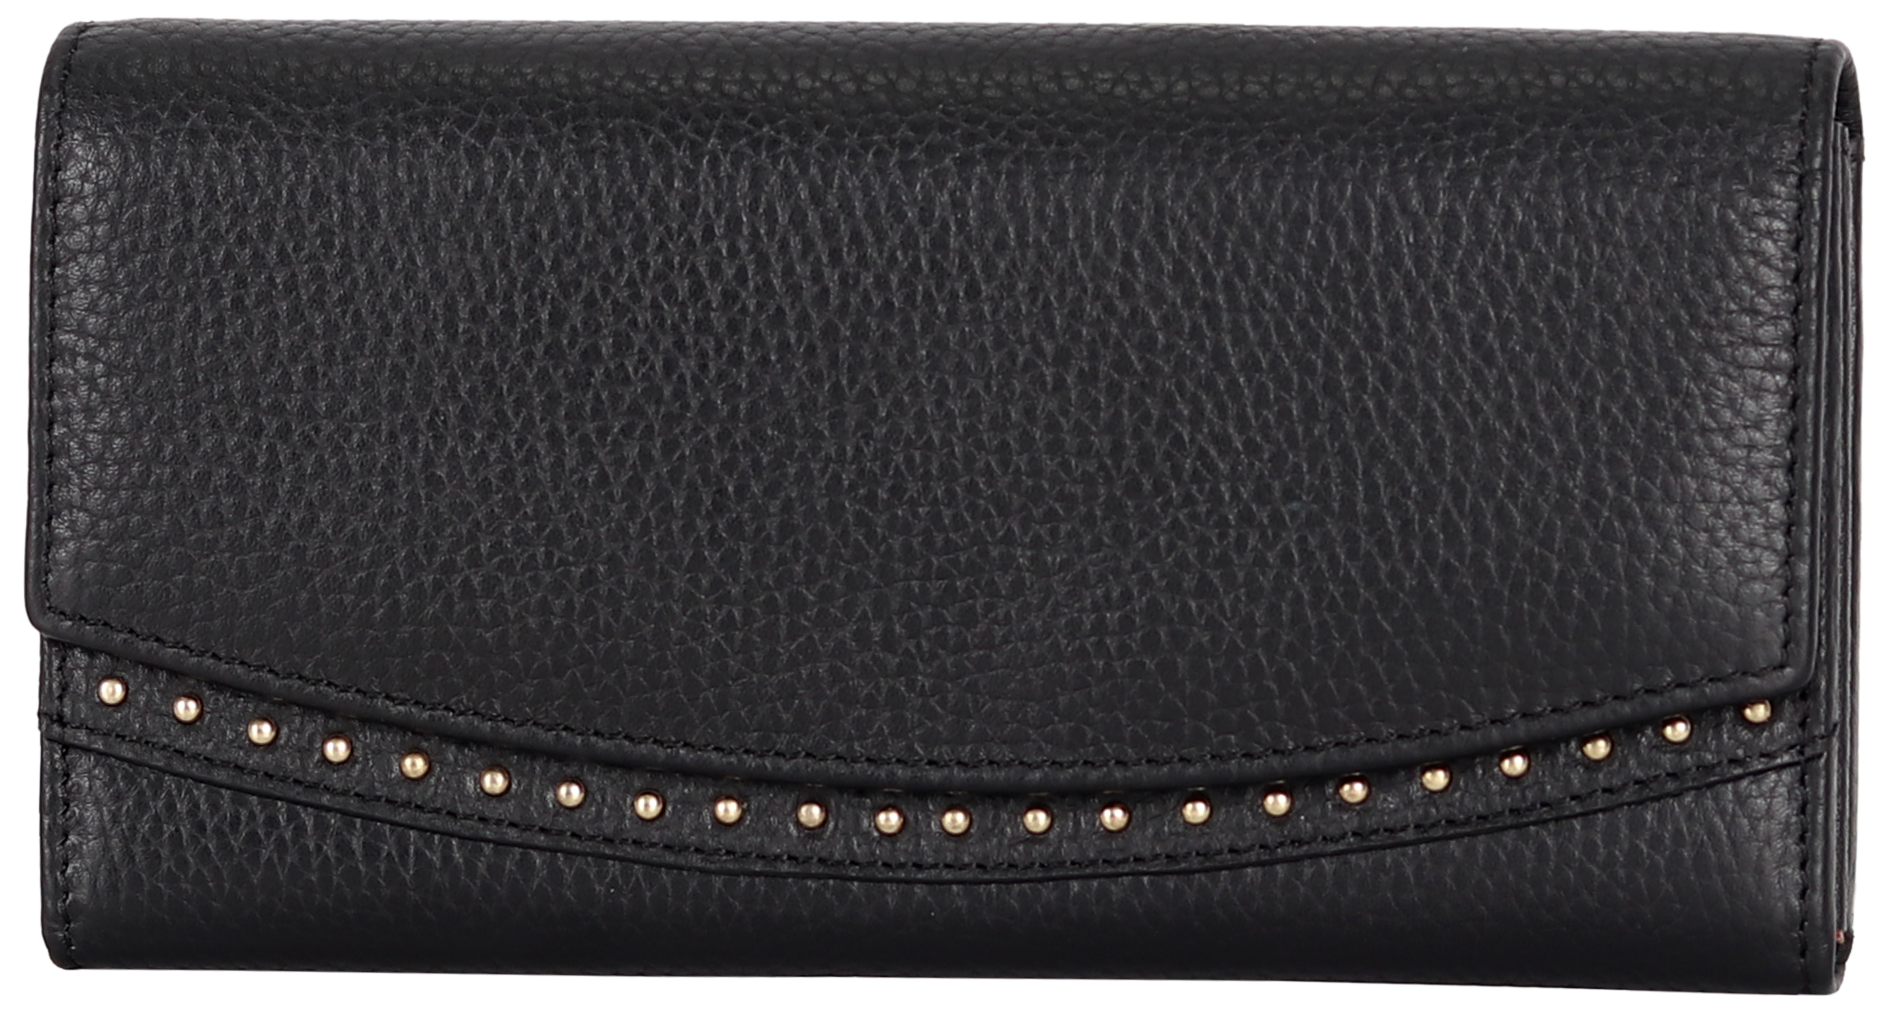 Rugged Earth Women's Leather Wallet with Round Studs